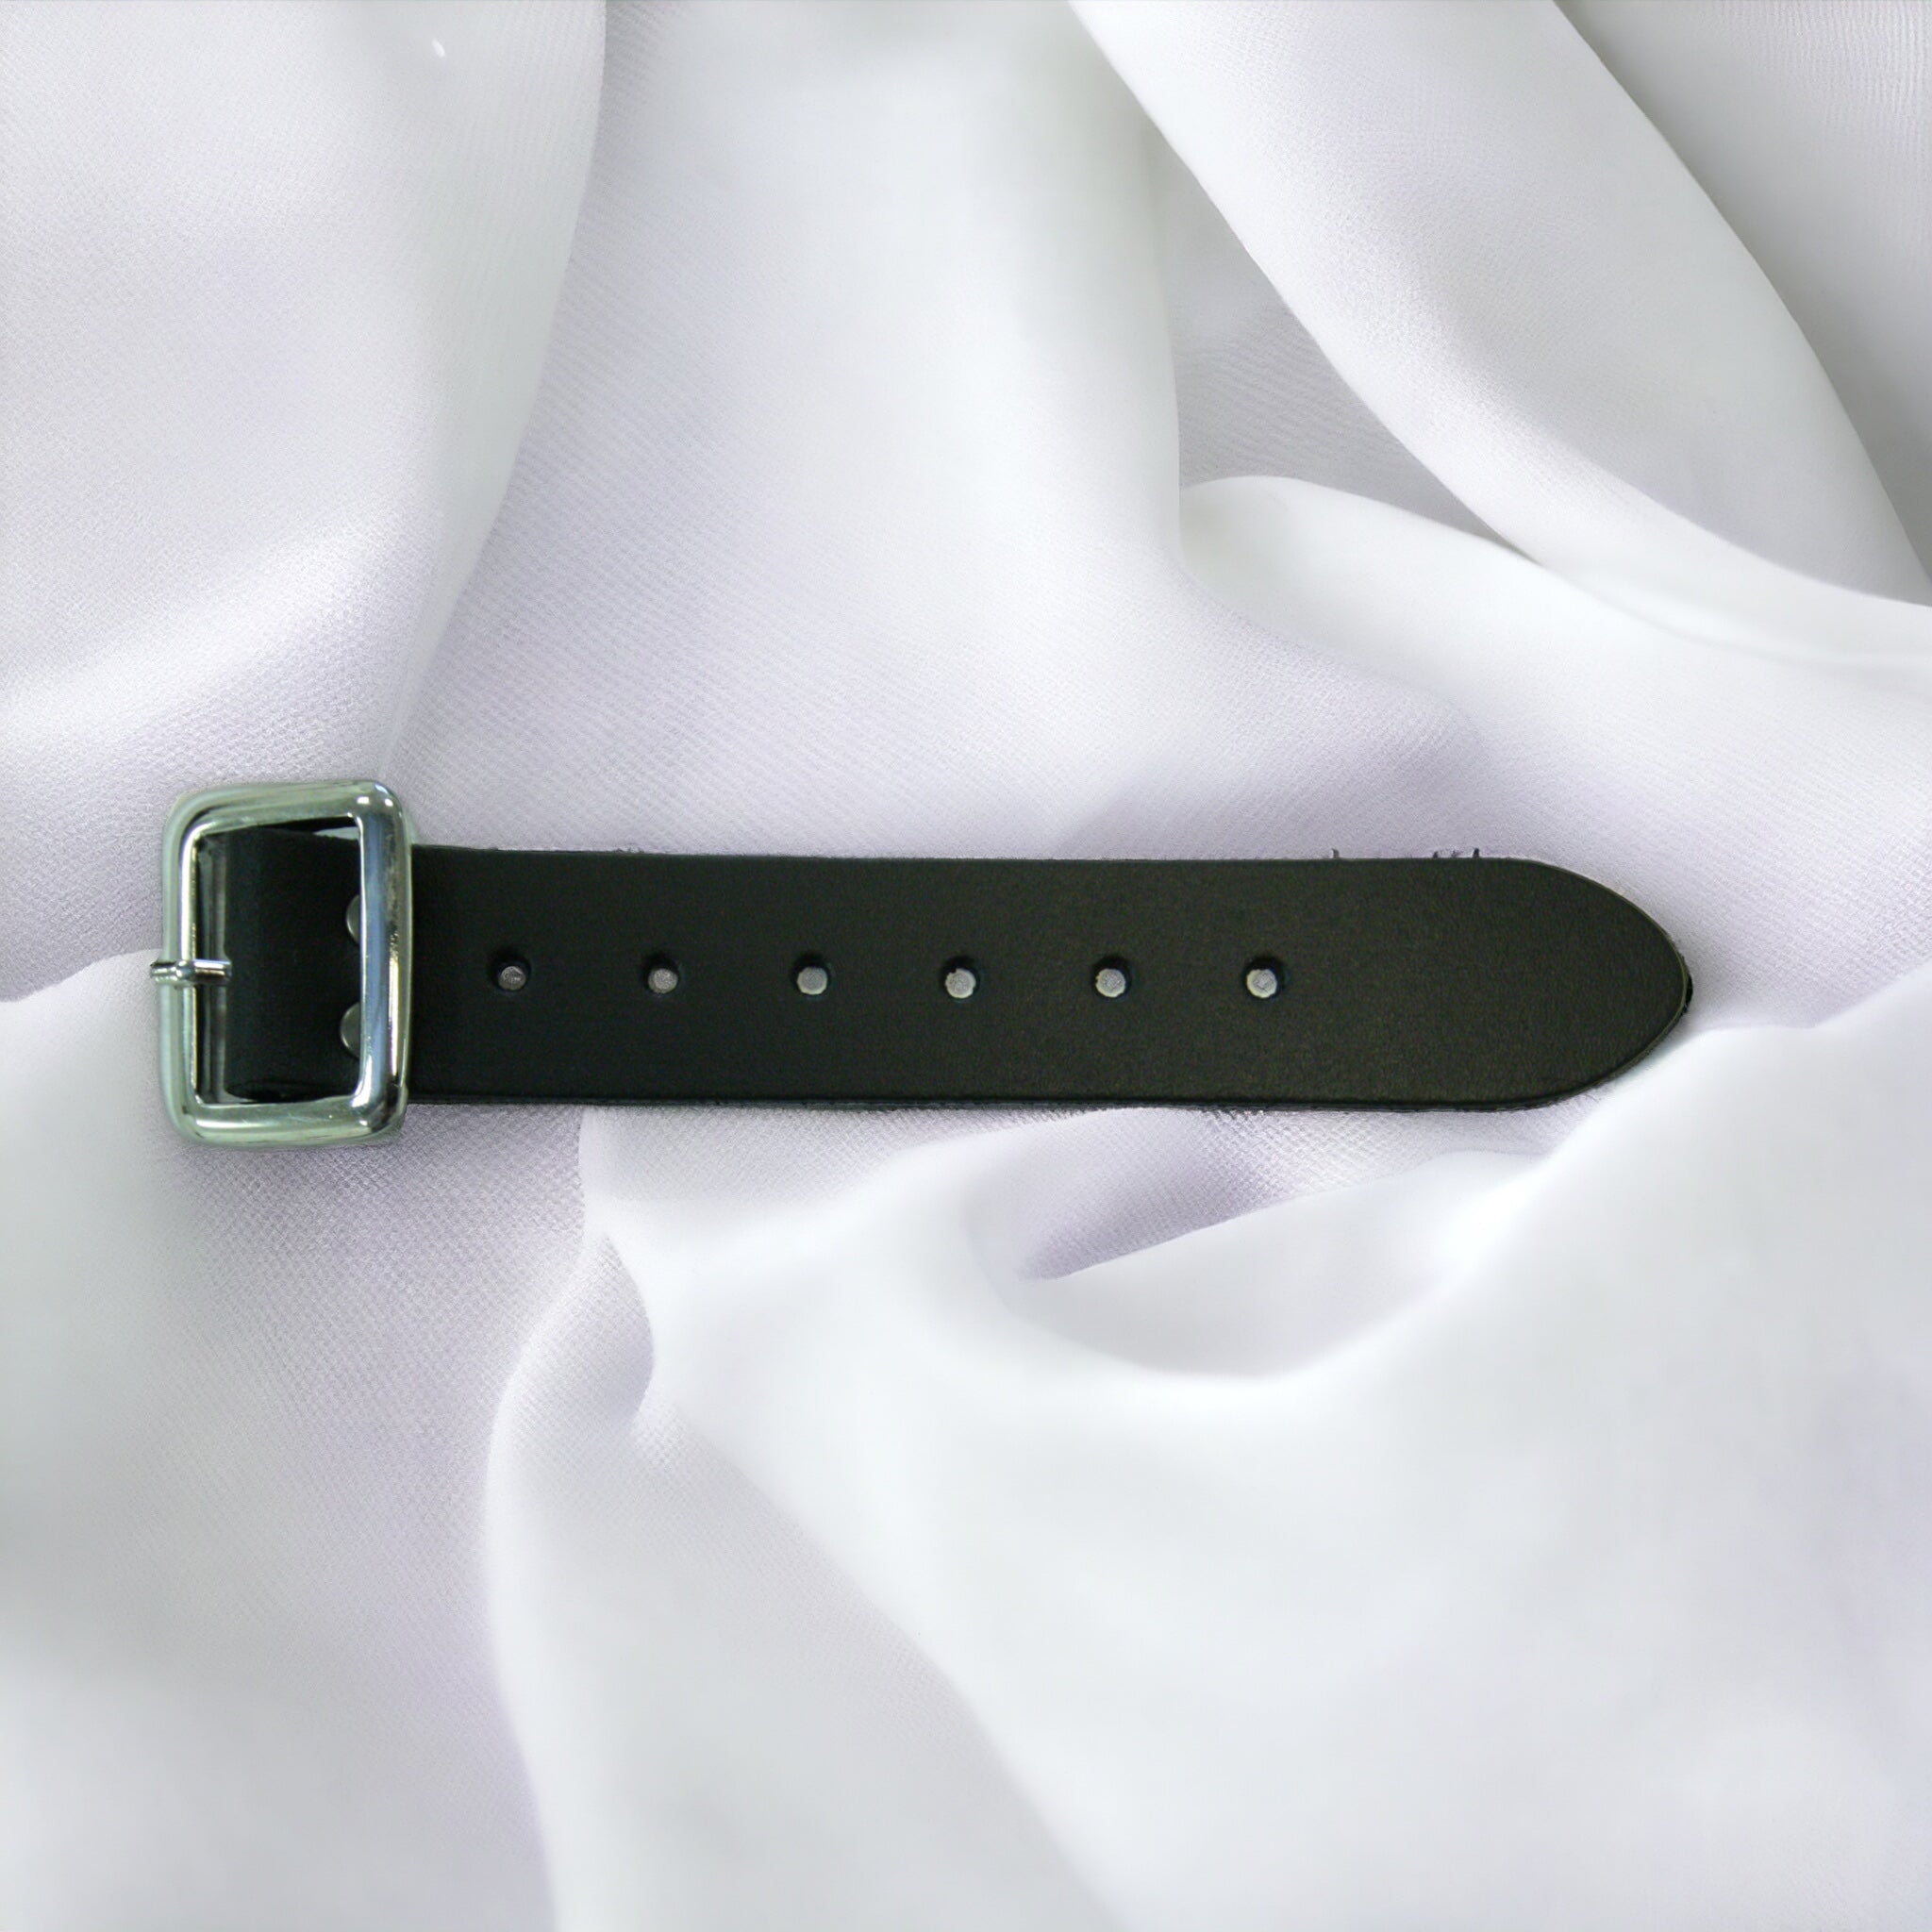 Leather Kilt extension strap 1 1/4" with buckle